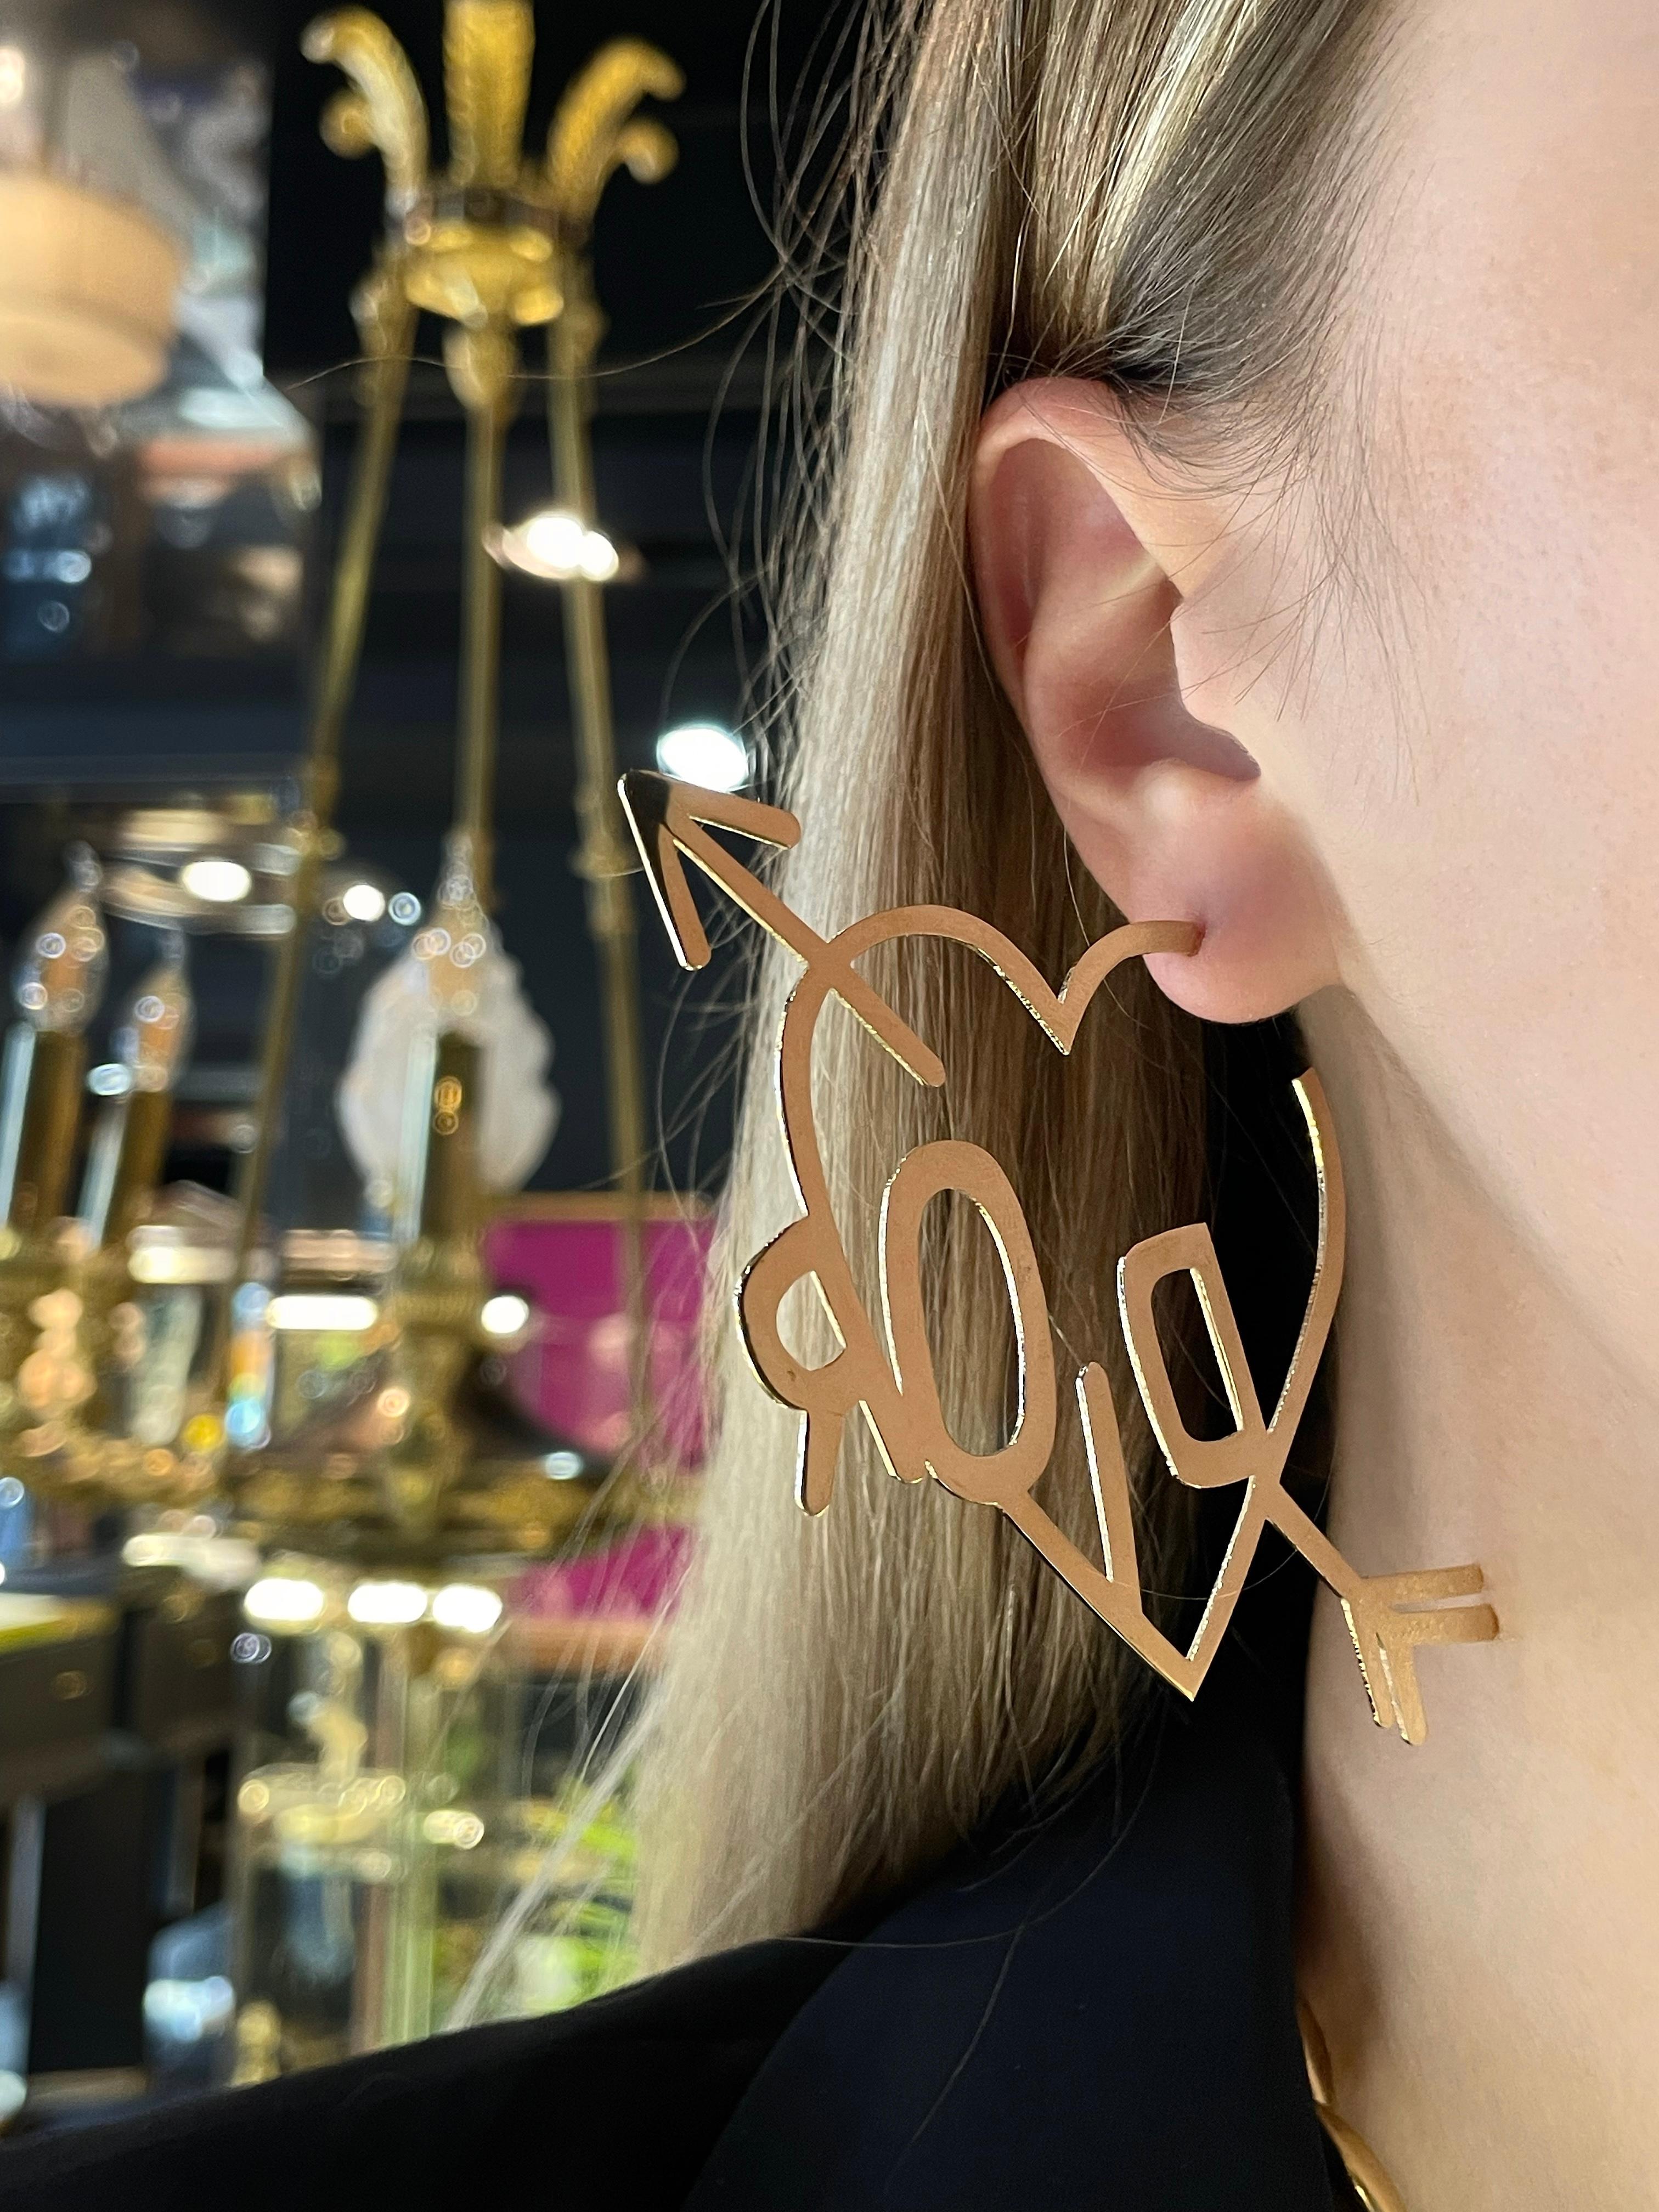 This is a massive pair of heart arrow hoop earrings designed by Christian Dior in 2000s. The piece is made in gold tone. It is perfect for unforgettable look. 

Size: 9.5x5.5cm

———

If you have any questions, please feel free to ask. We describe